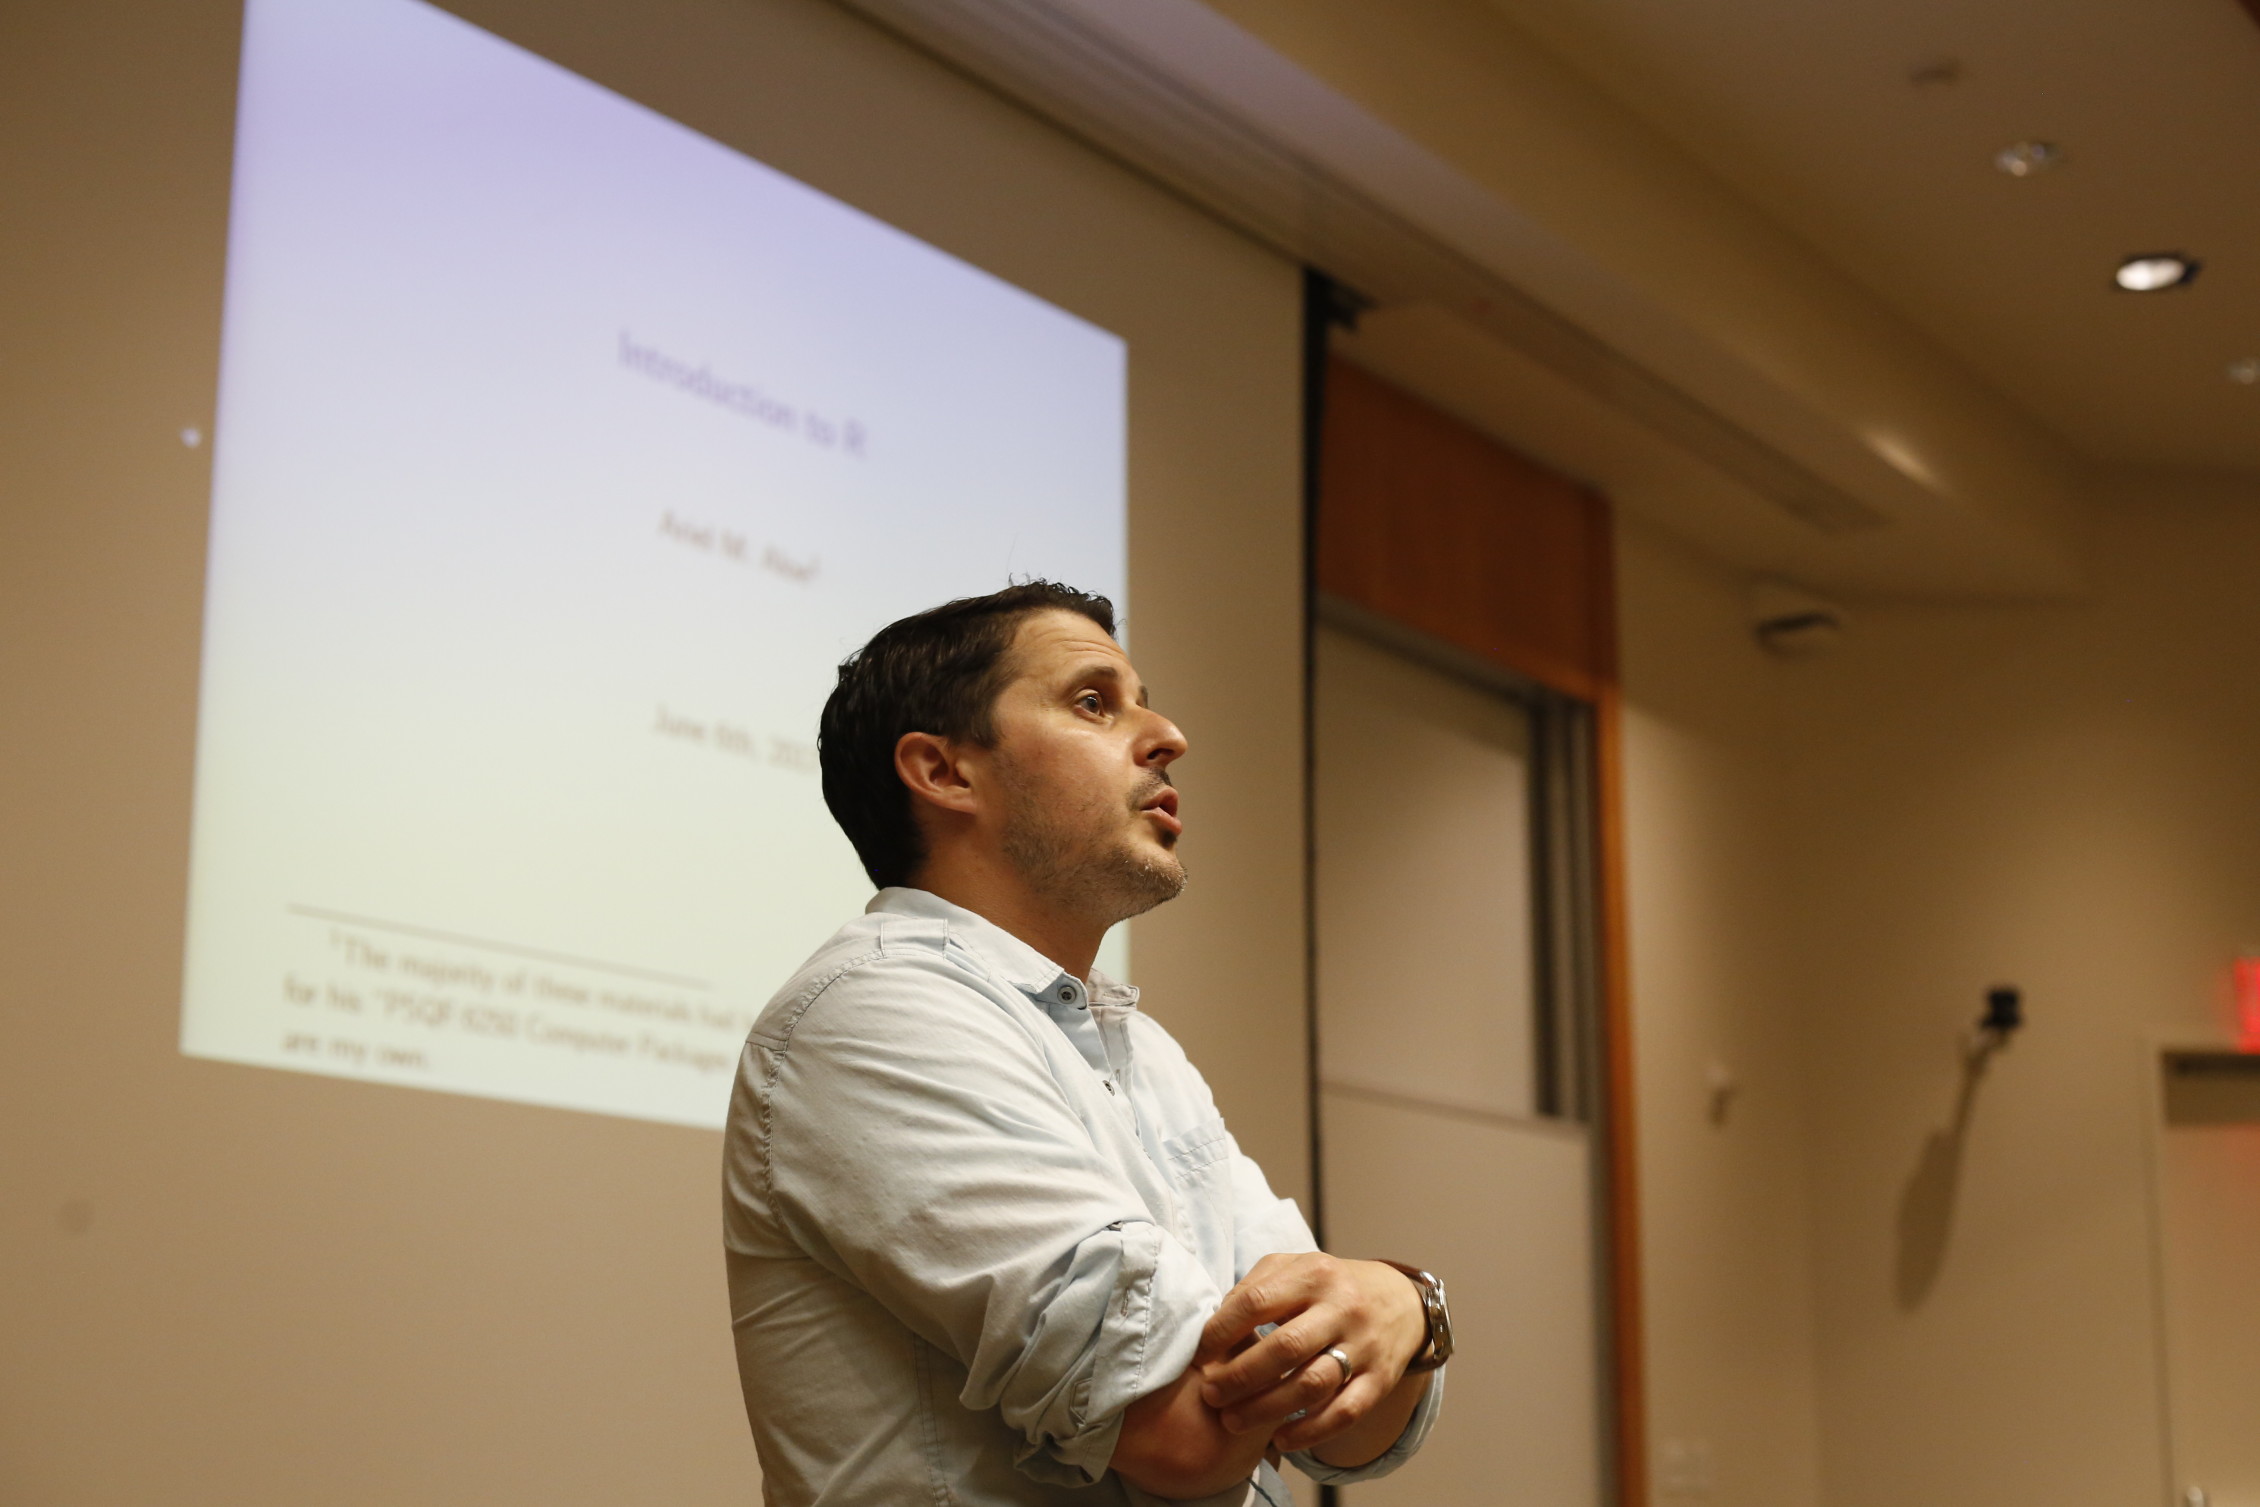 An instructor lectures during an ISRC data science institute session